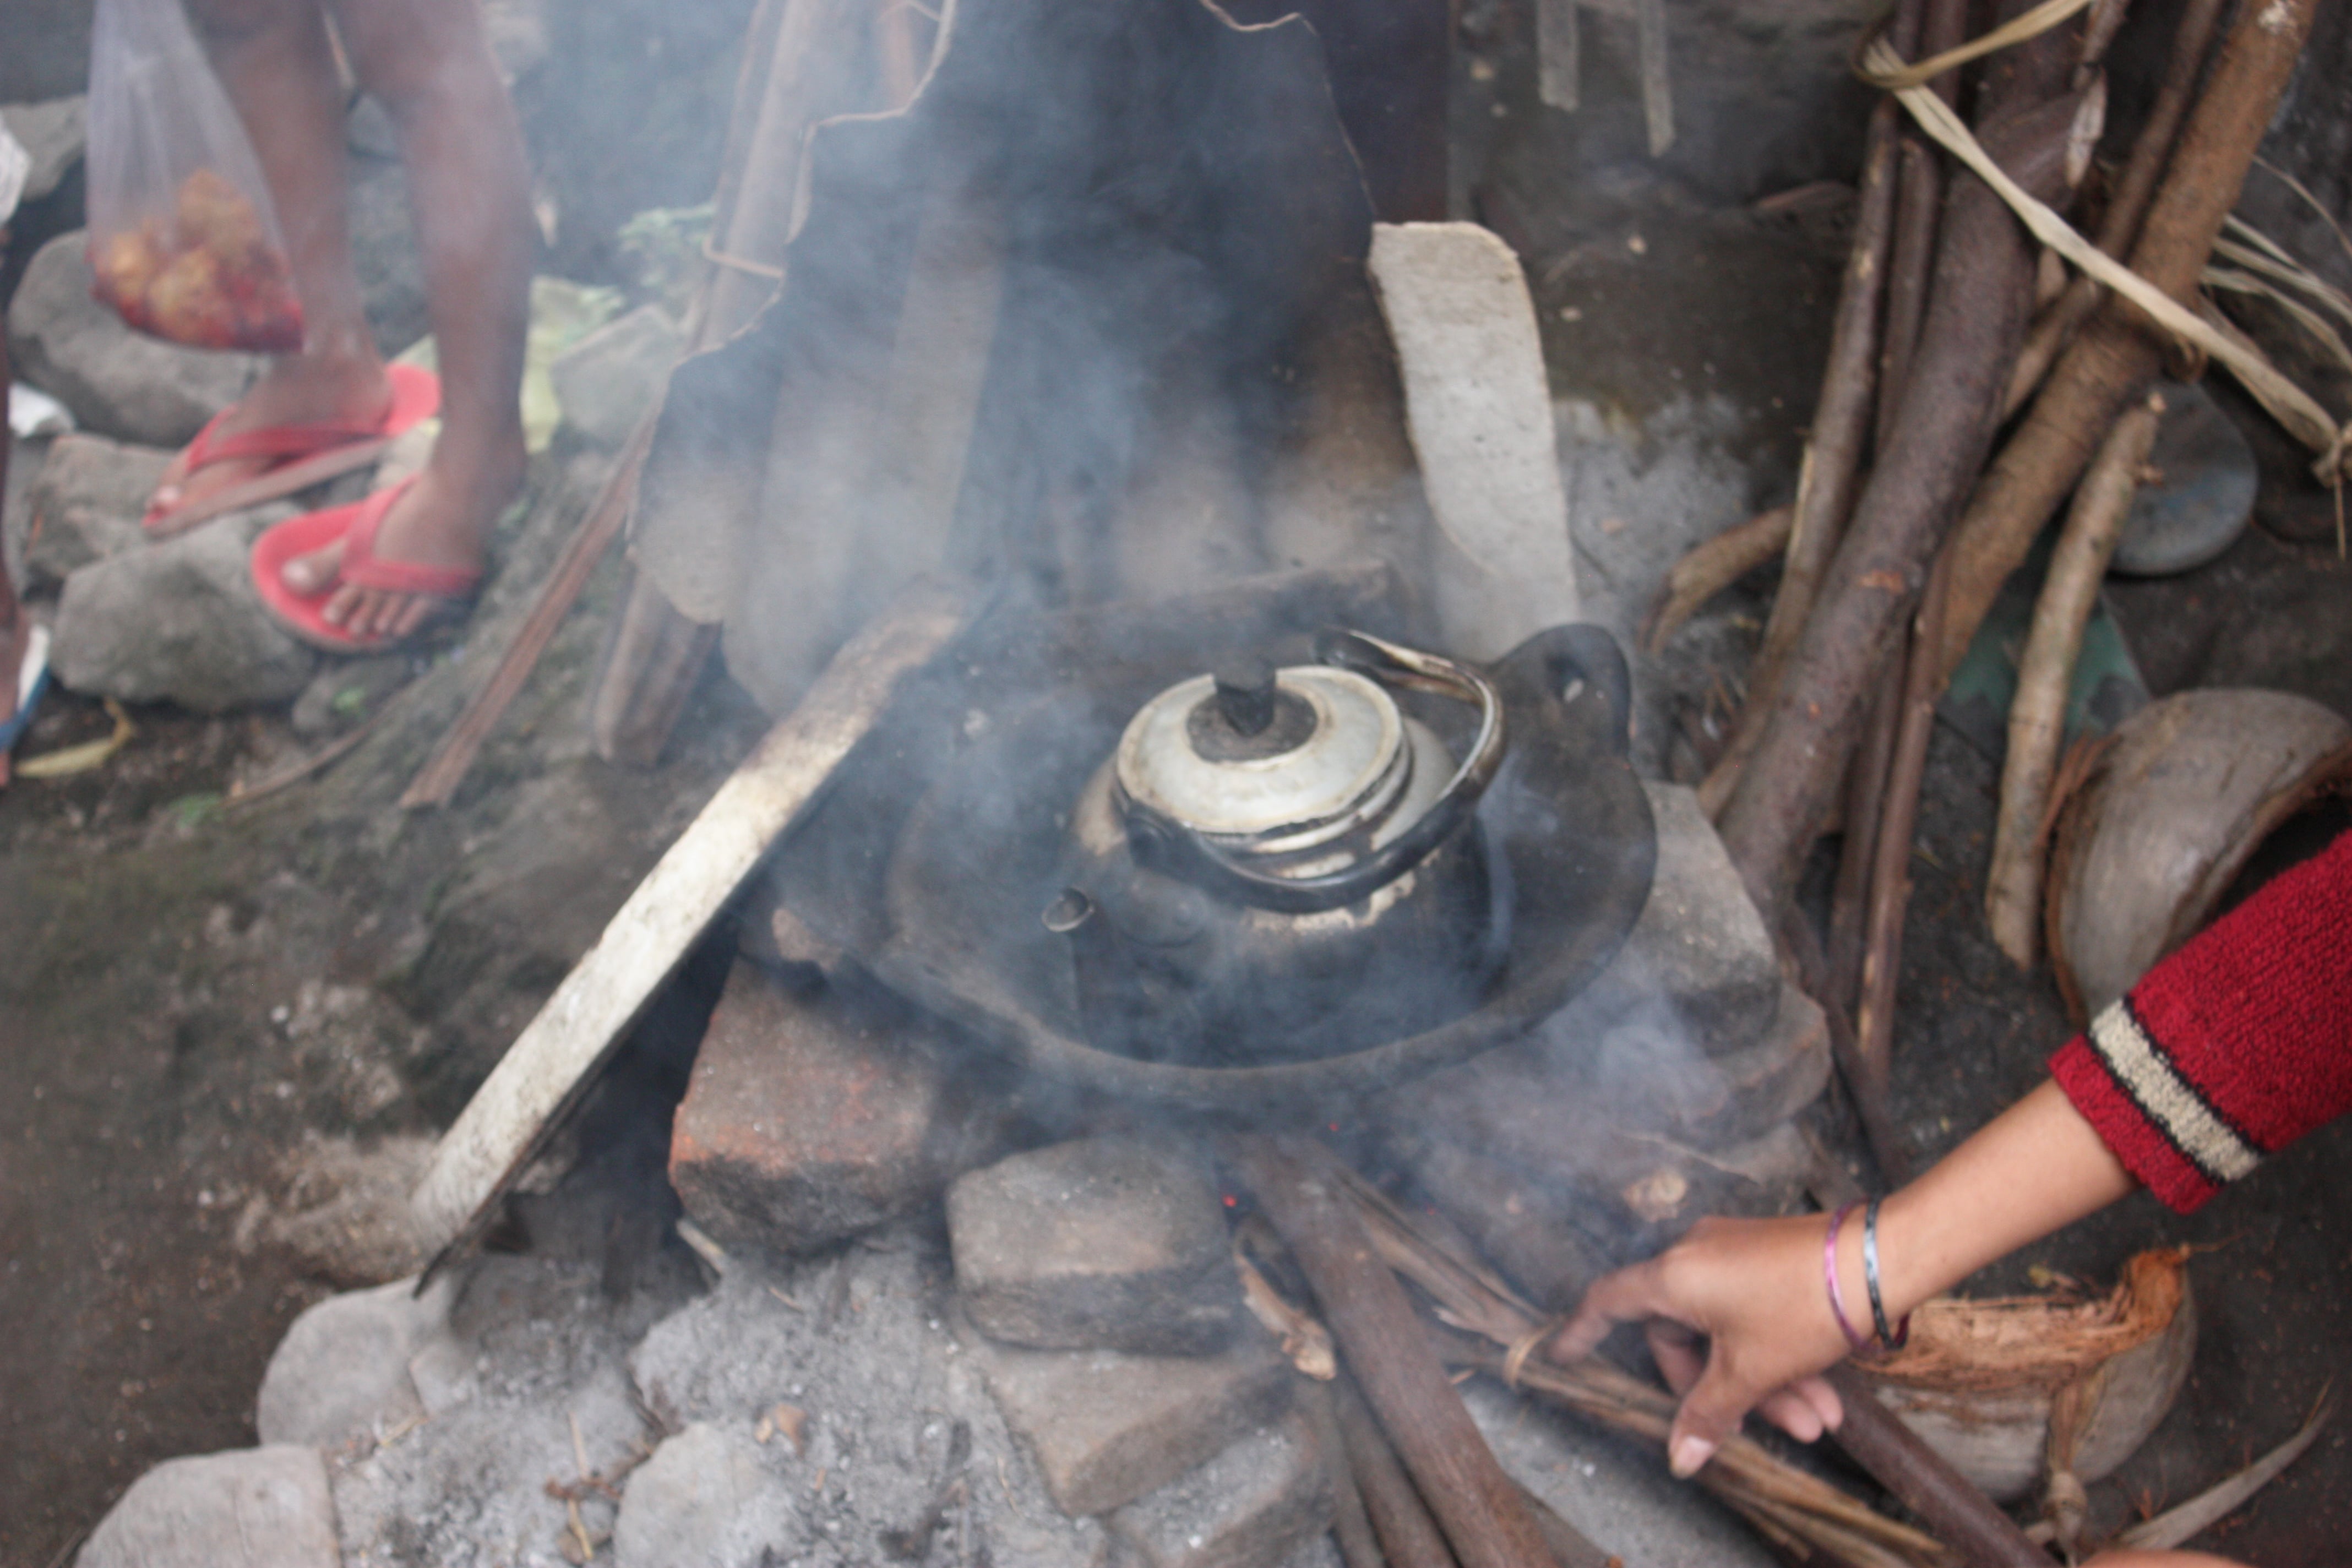 wood cooking still common and is a big killer